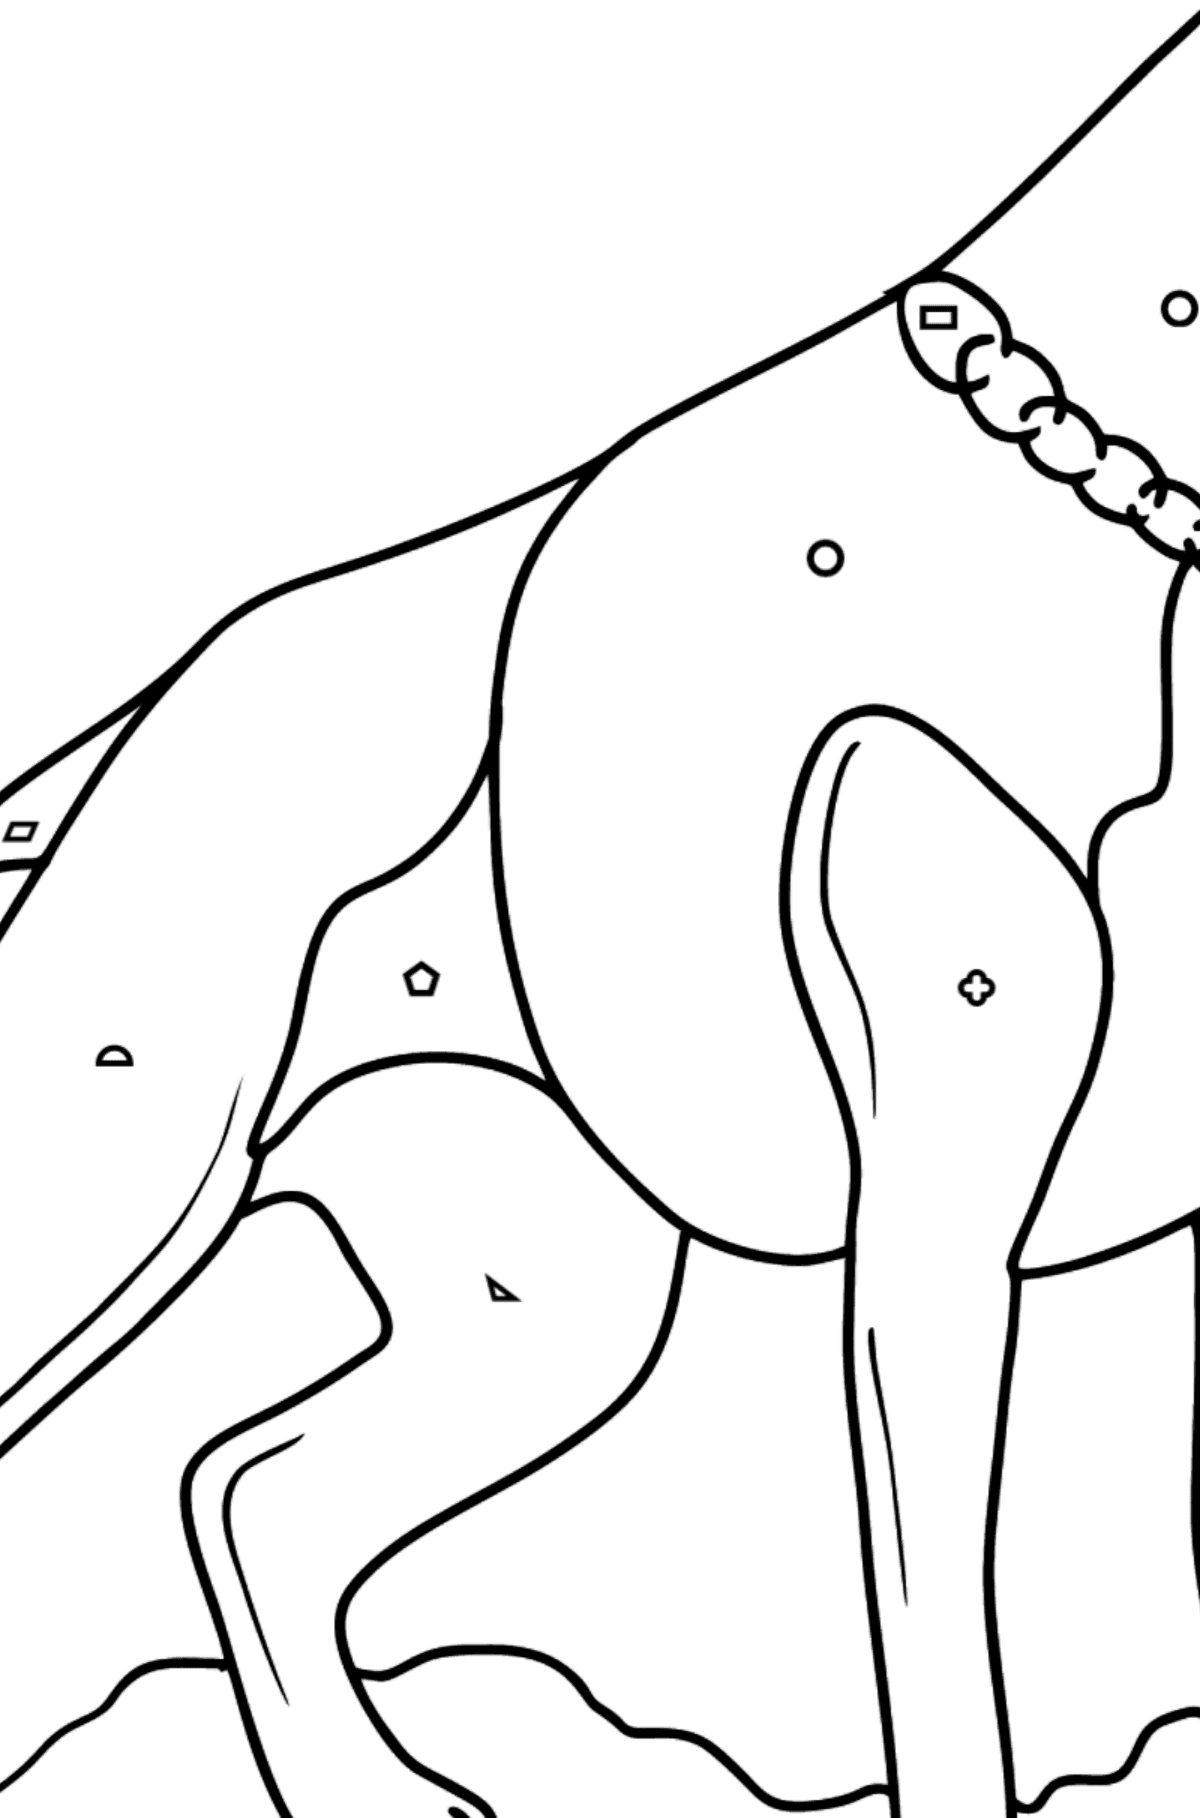 Boxer Dog coloring page - Coloring by Geometric Shapes for Kids